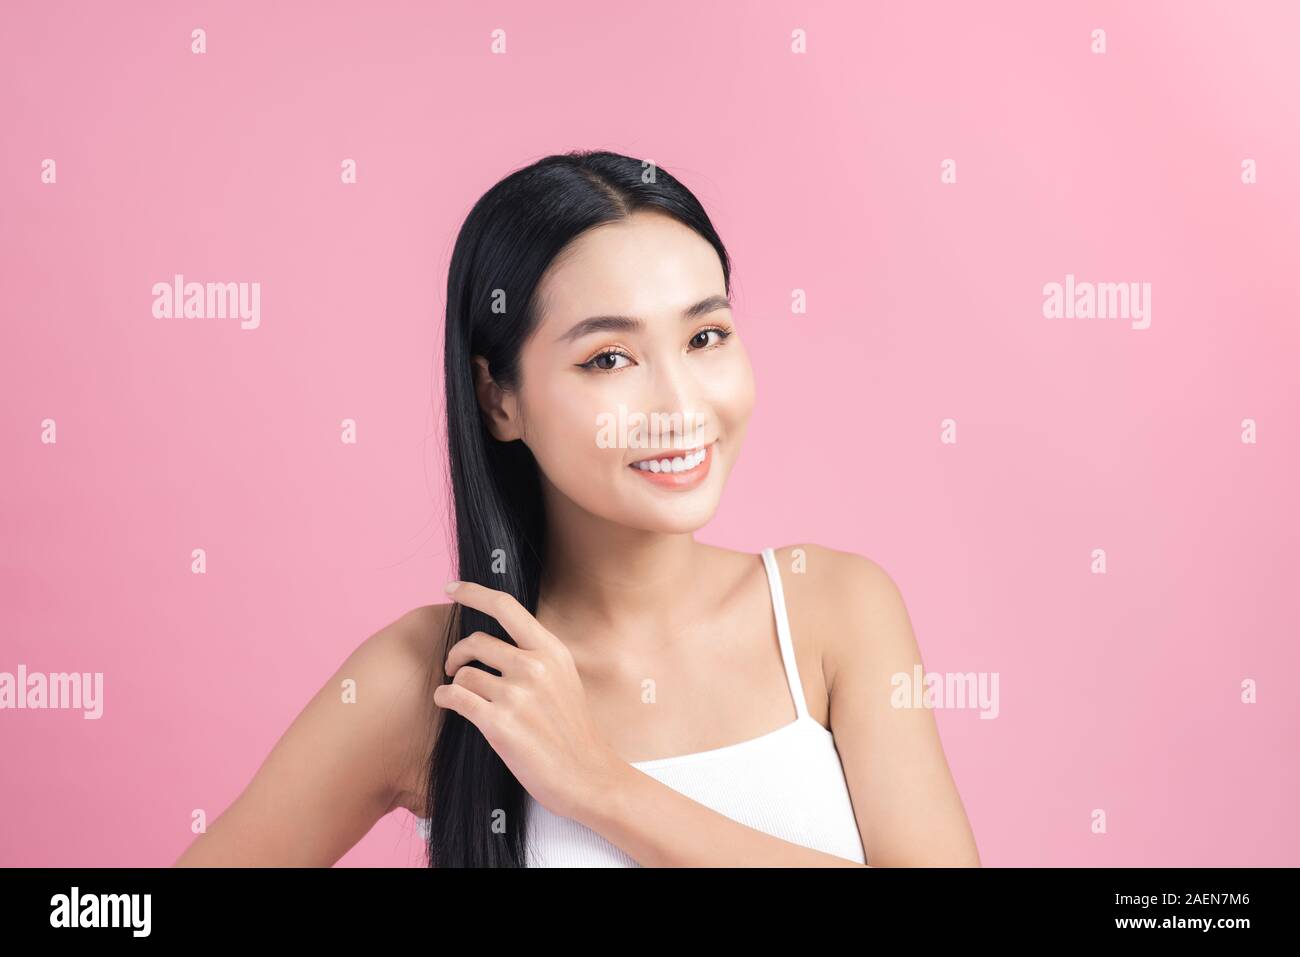 Young beautiful Asian woman taking care of her hair. Beauty portrait , natural make-up, beauty face, isolated over pink background. Stock Photo